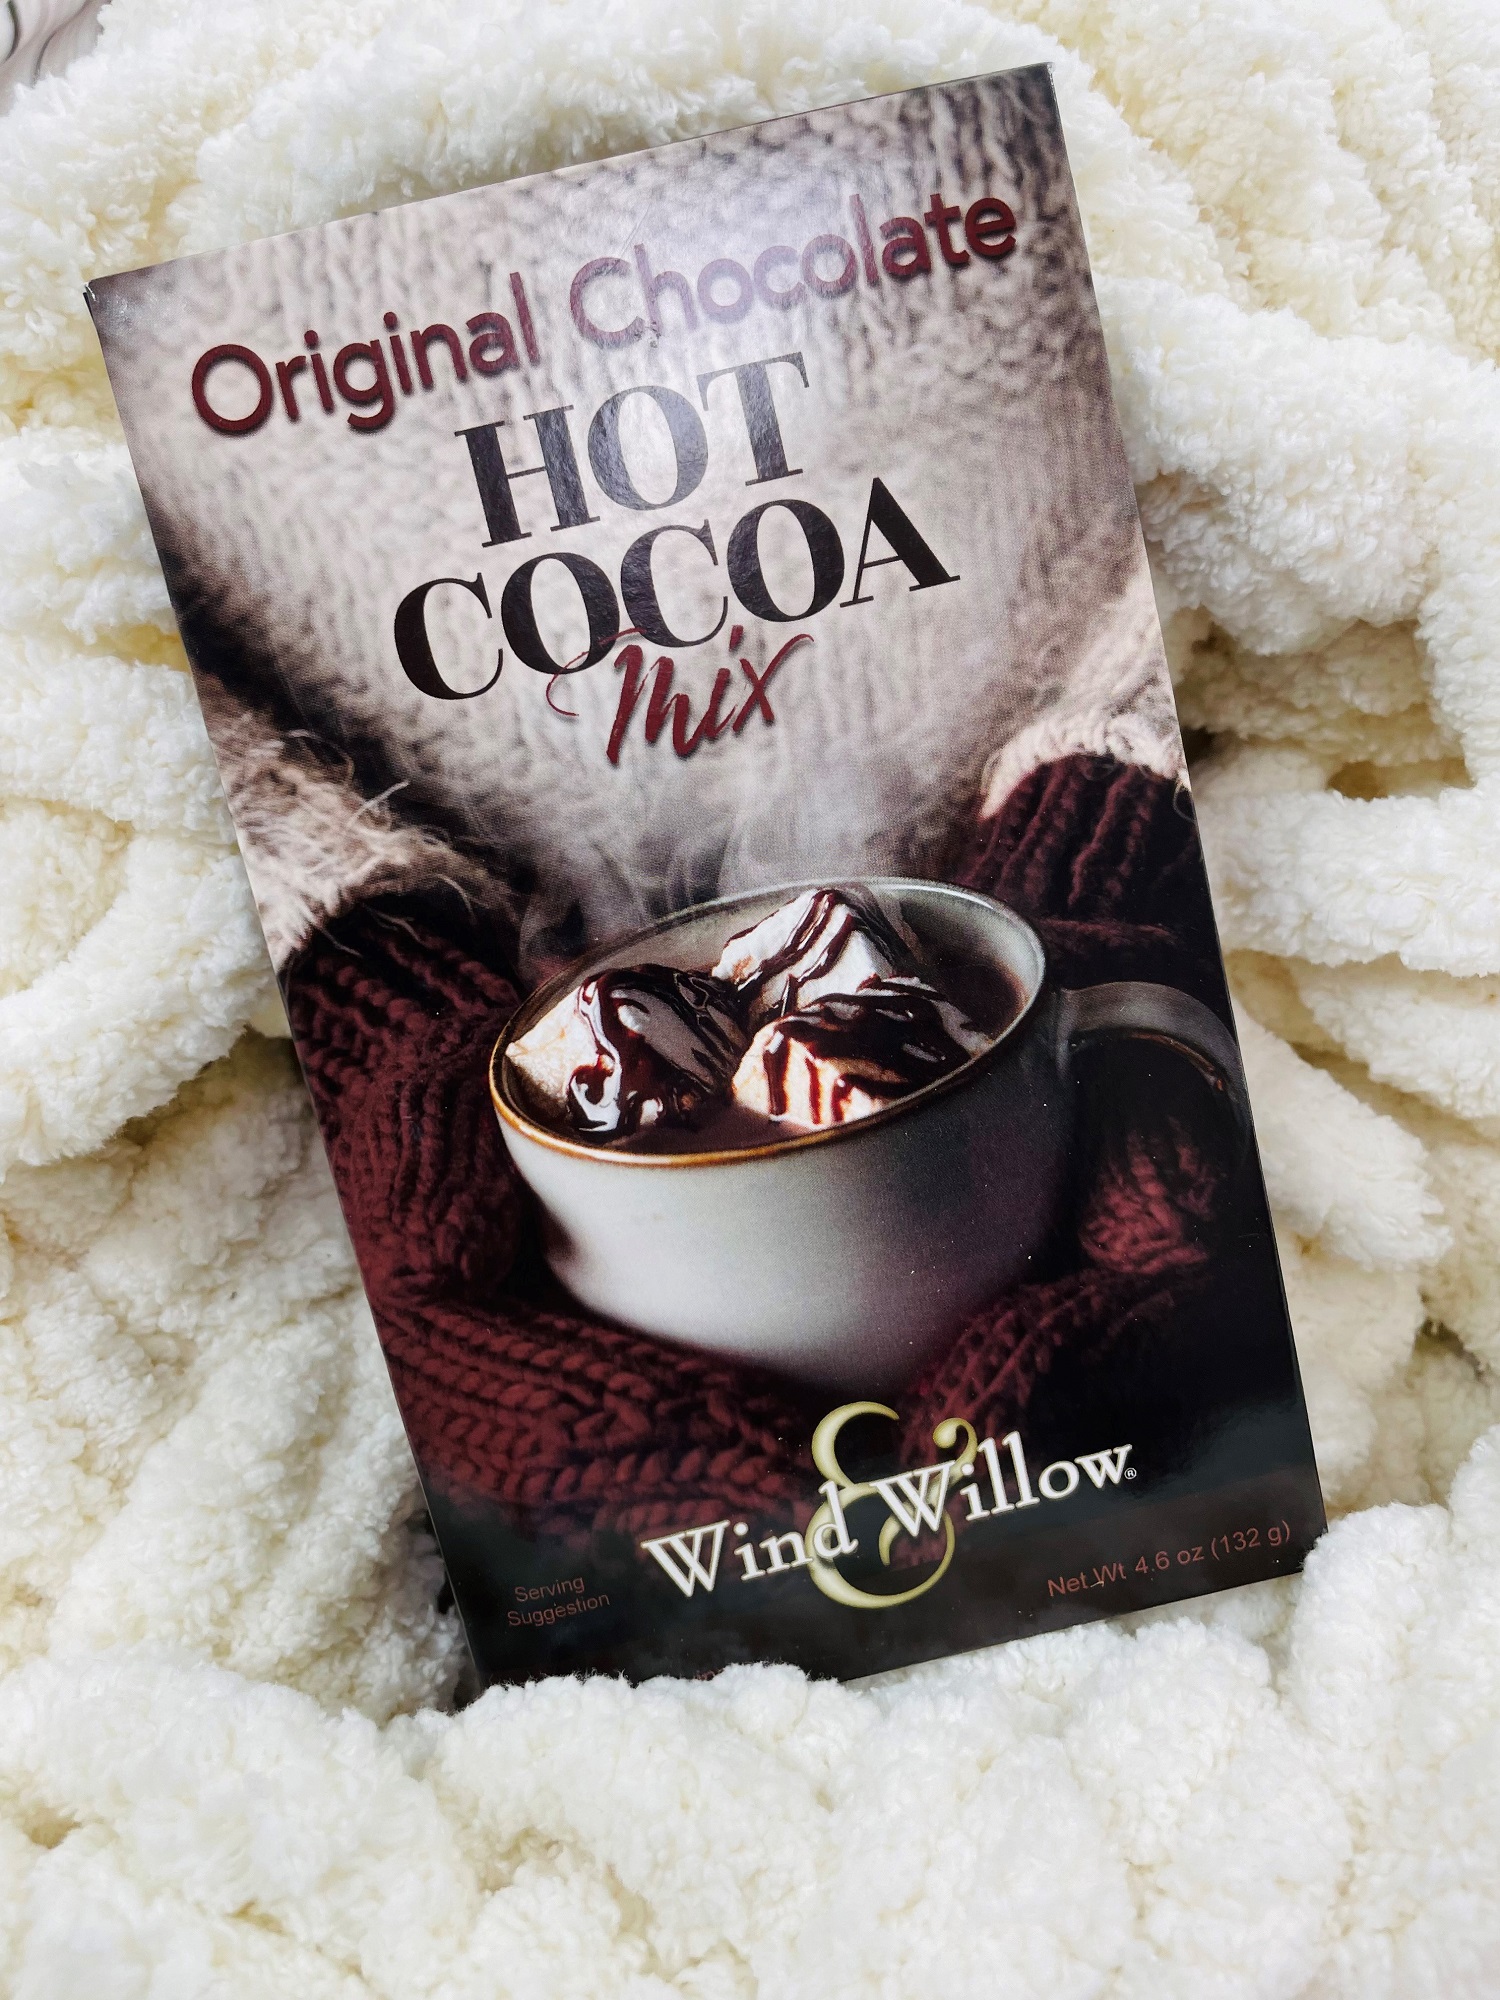 Wind & Willow Original Chocolate Hot Cocoa Mix